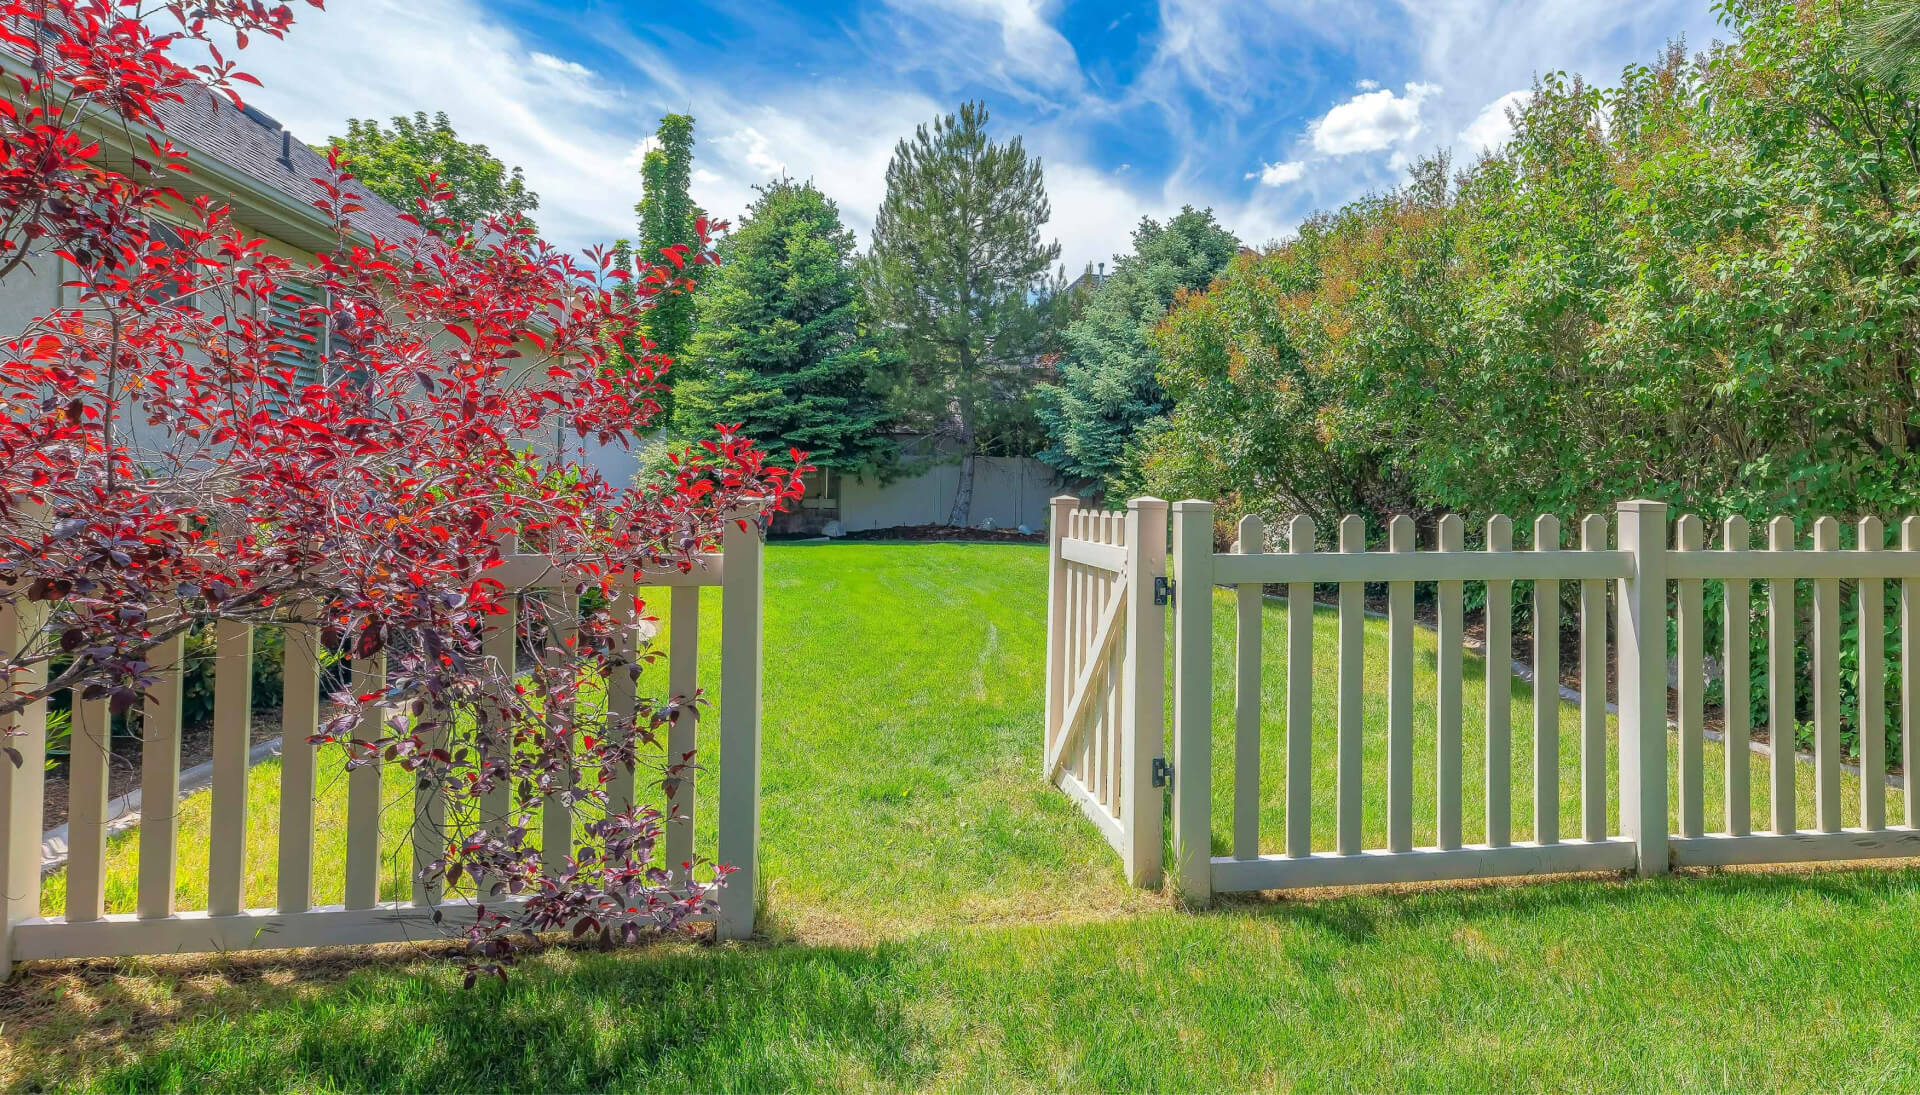 A functional fence gate providing access to a well-maintained backyard, surrounded by a wooden fence in Detroit